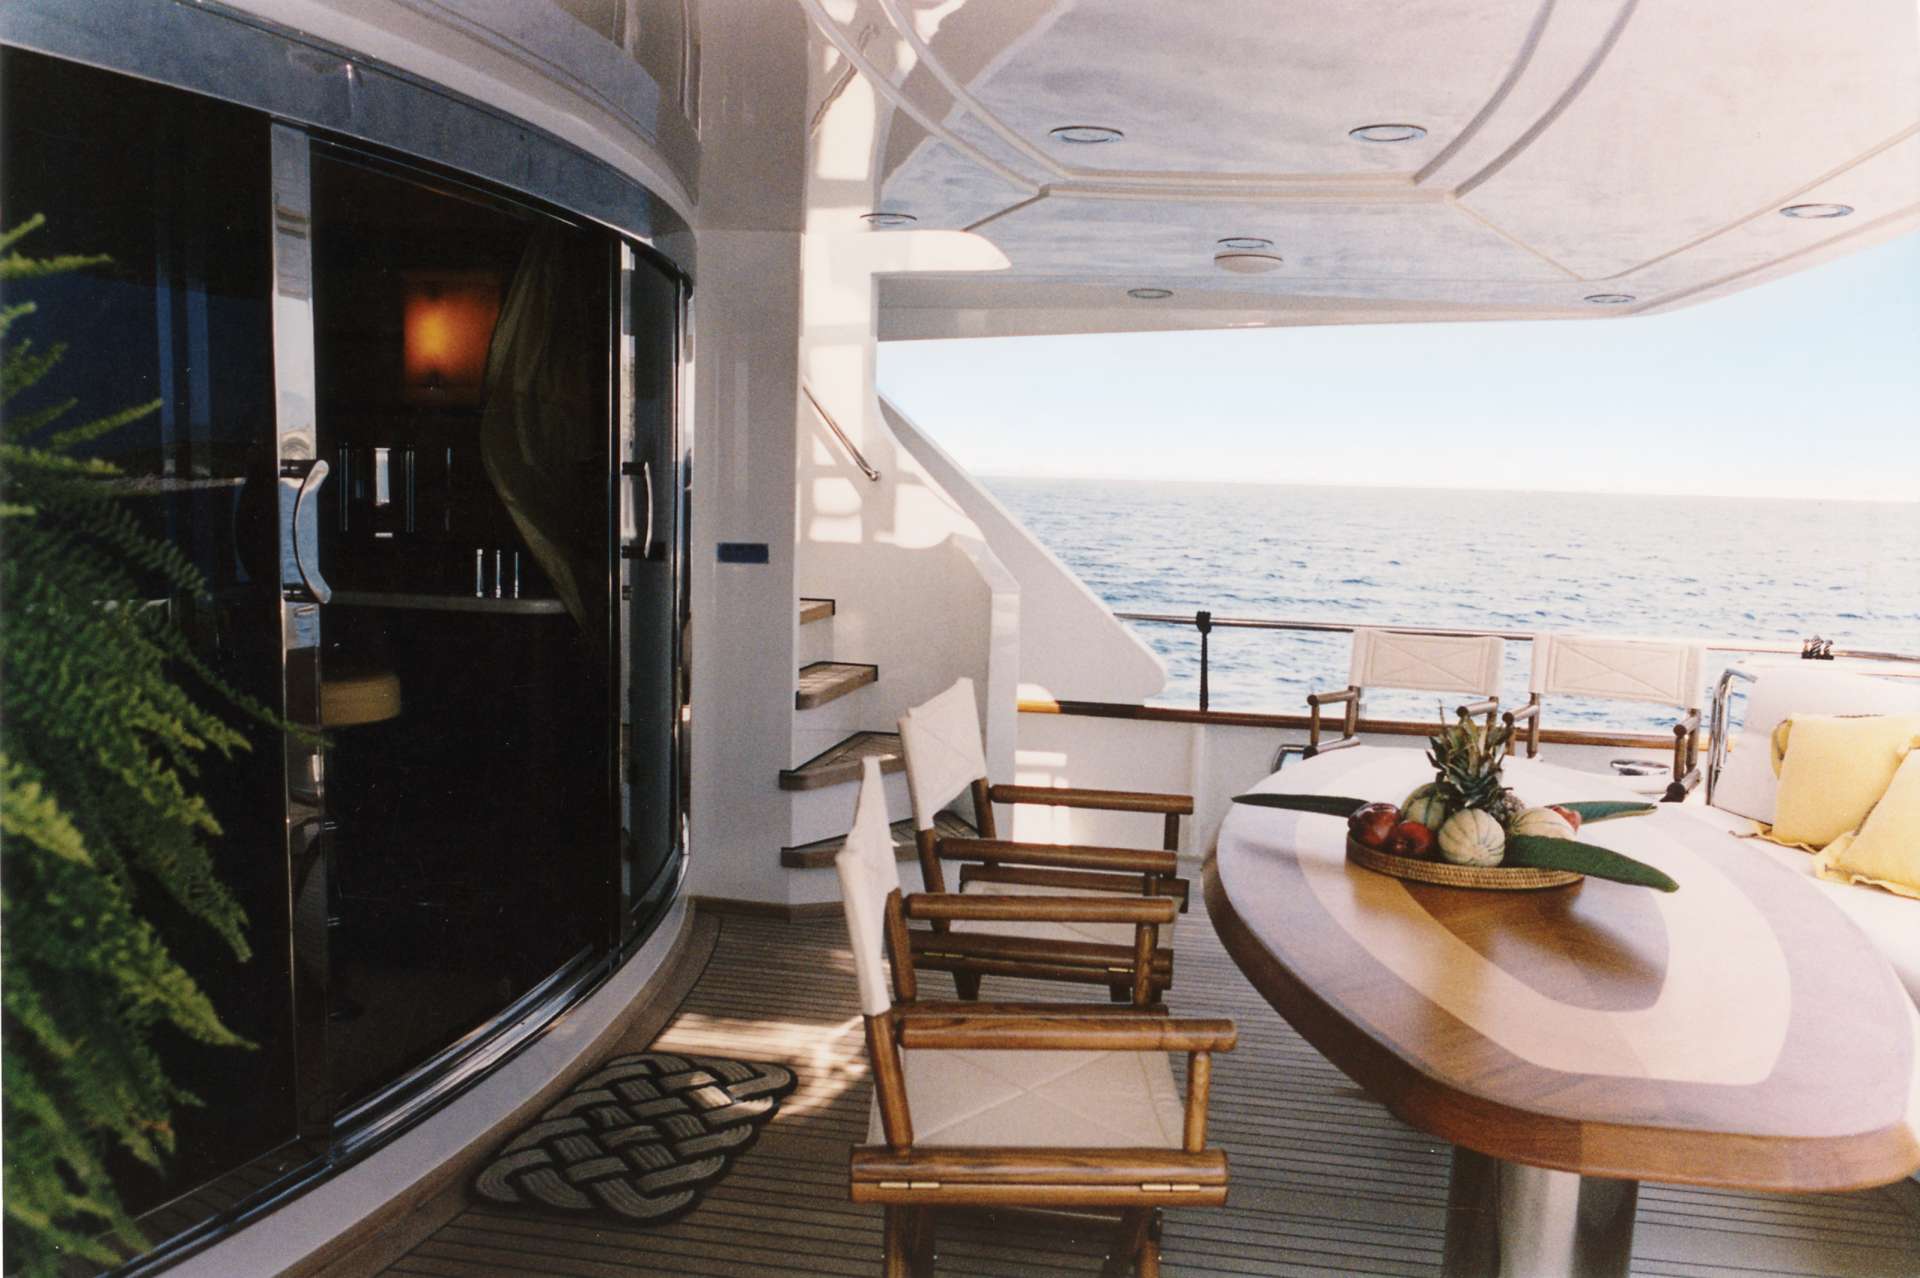 Aft Deck With Table And Chairs